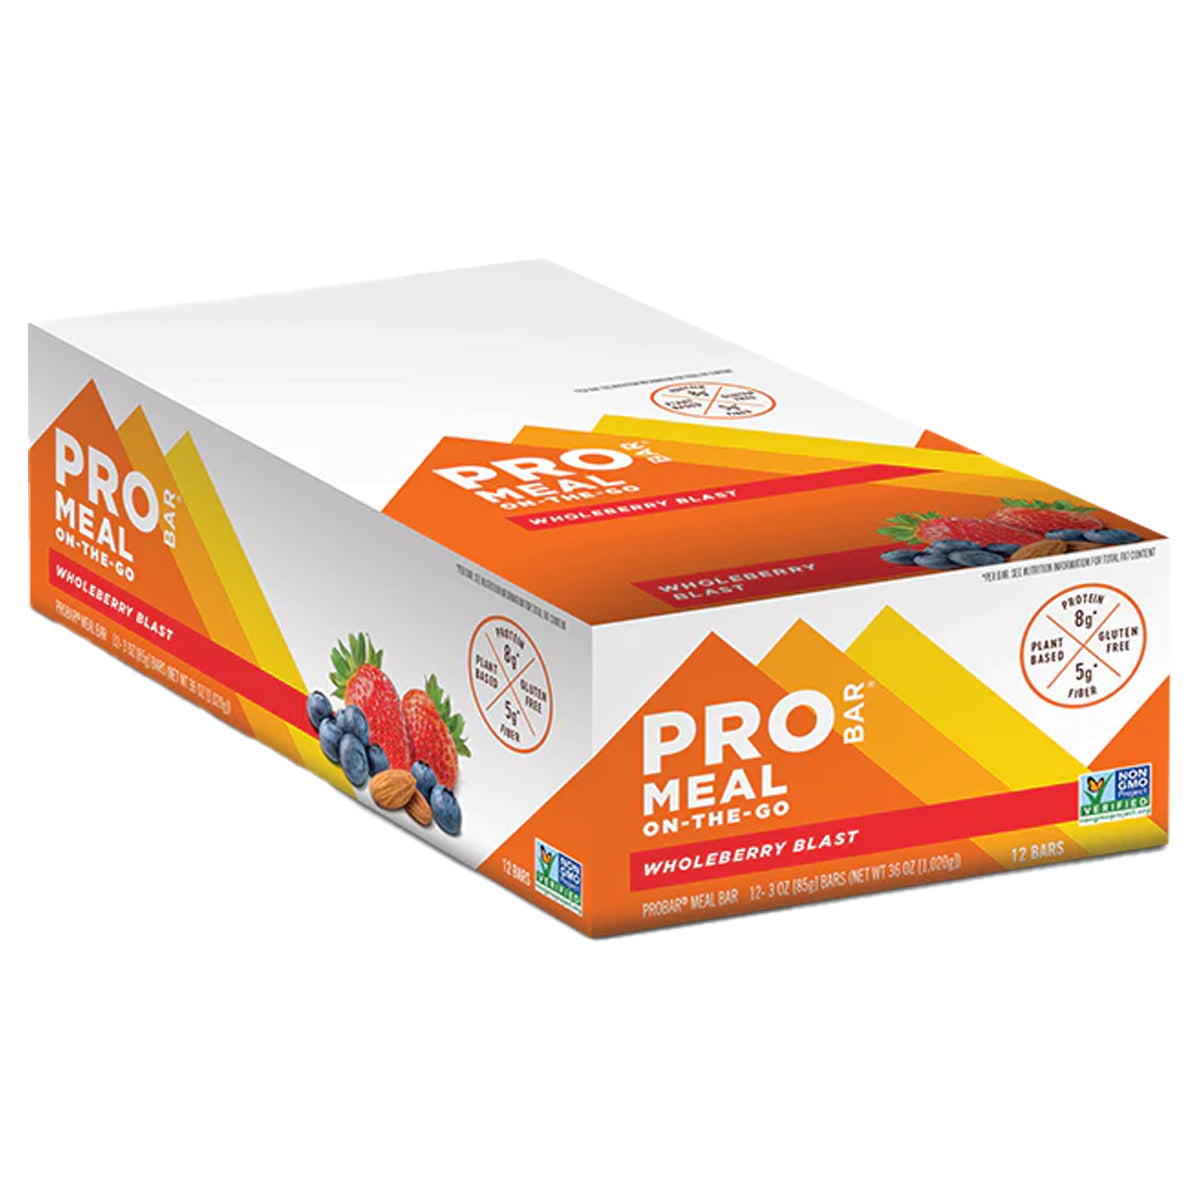 PROBAR Meal Bar in Wholeberry Blast by GOHUNT | Pro Bar - GOHUNT Shop